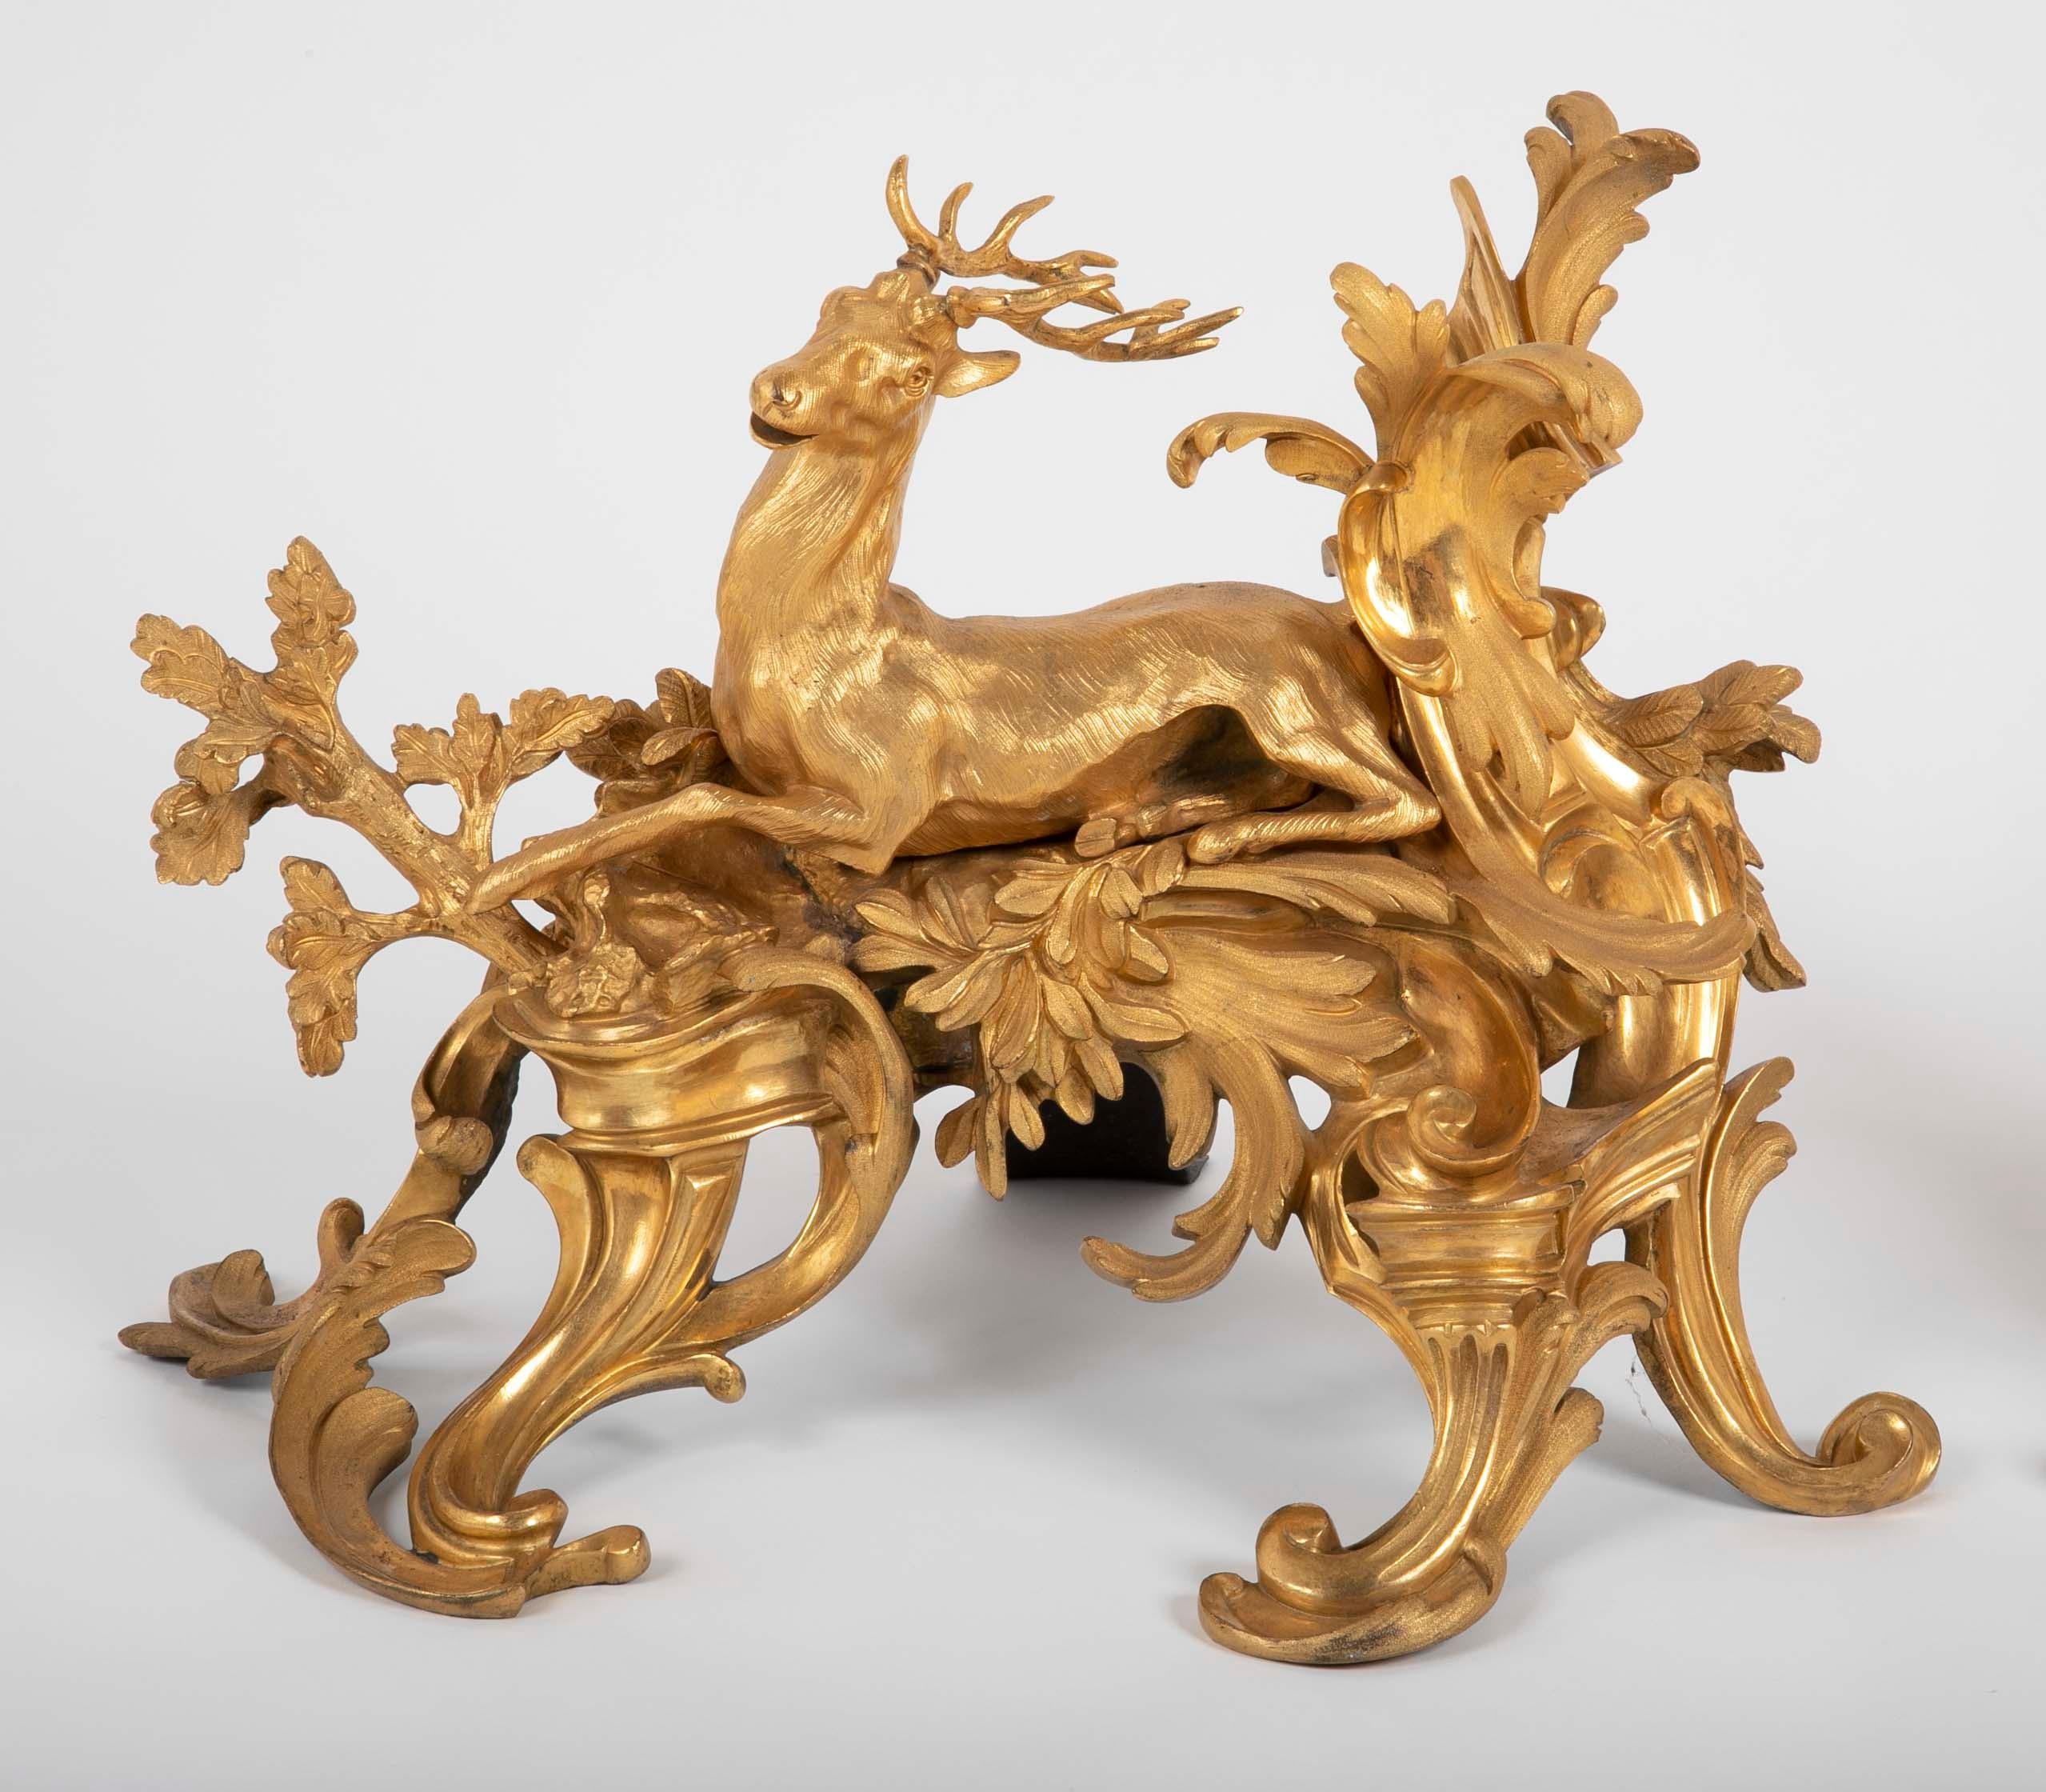 Fabulous pair of Louis XV style d'ore bronze chenets; one cast with the figure of a seated boar, the other a running stag, each amidst oak branches and acanthus, above pierced scrolled acanthus feet. 19th century.